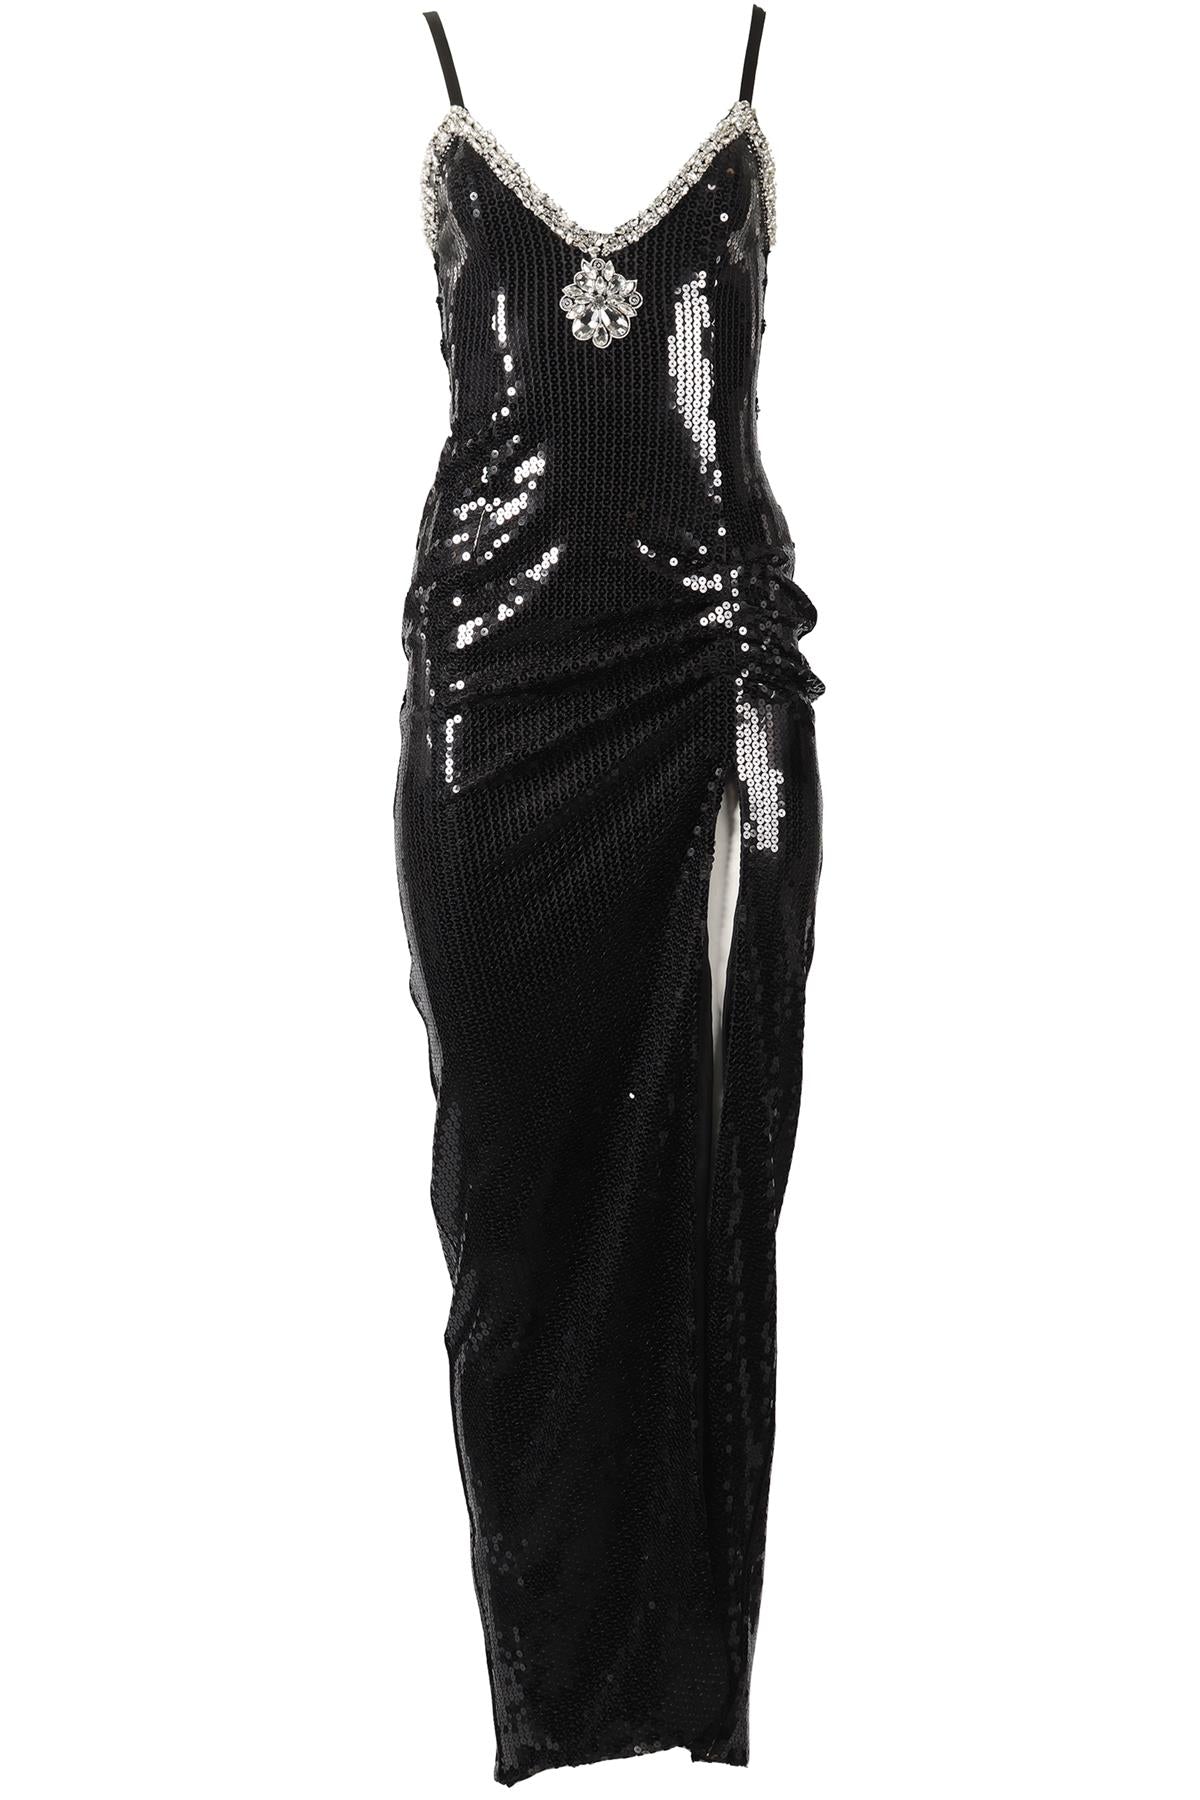 ALESSANDRA RICH CRYSTAL AND SEQUIN MAXI DRESS IT 40 UK 8